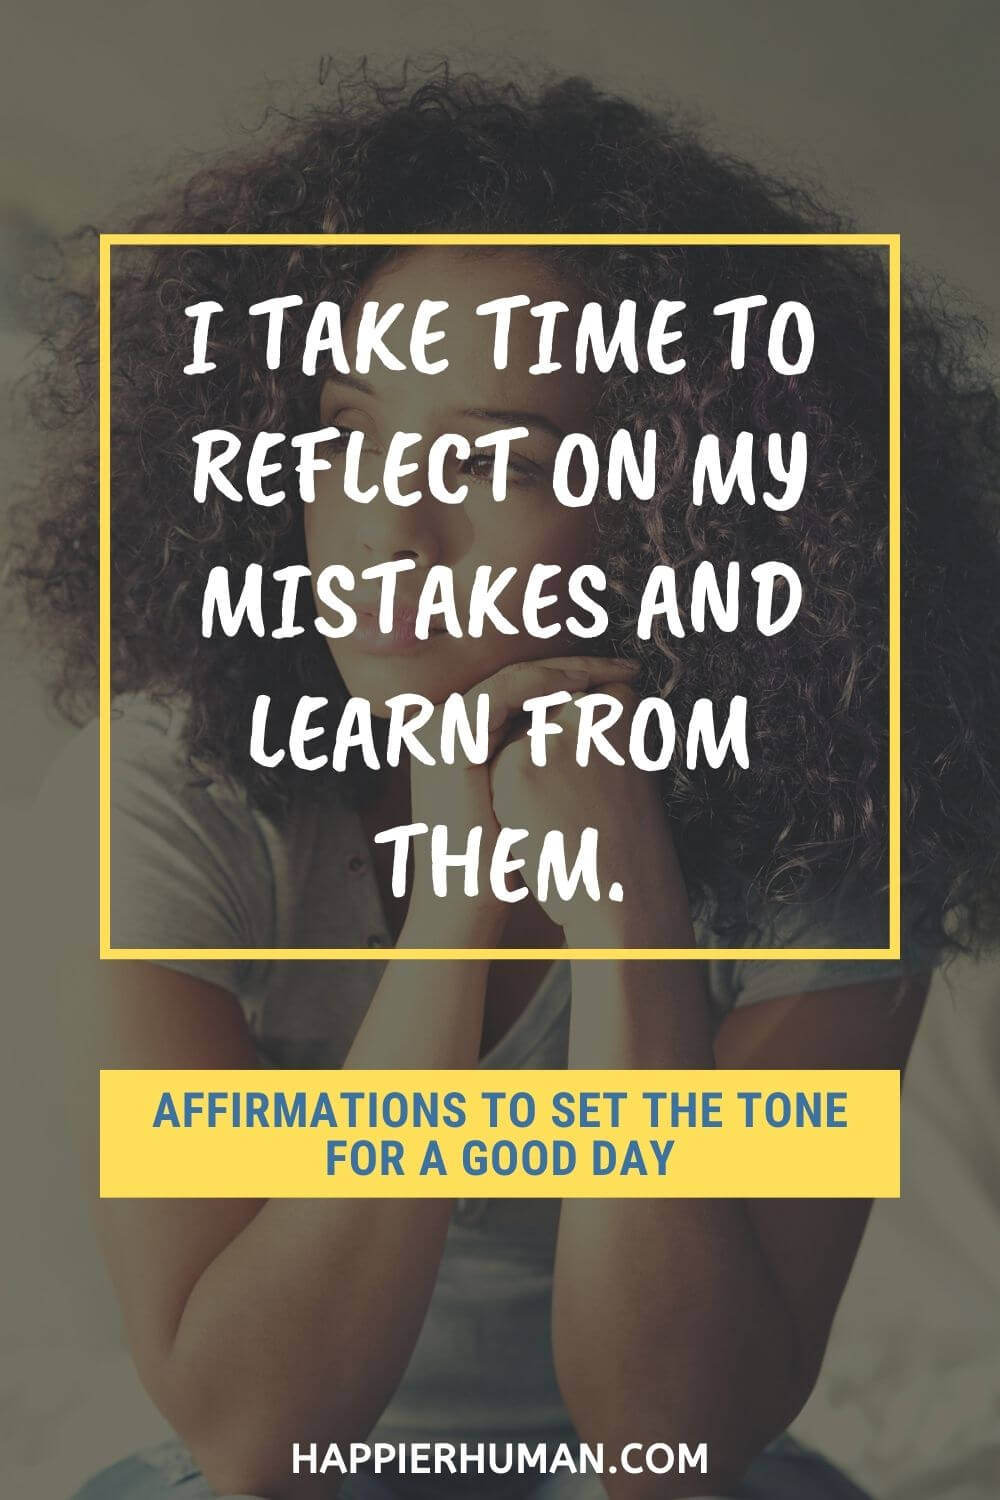 Affirmations for a Good Day - I take time to reflect on my mistakes and learn from them. | morning affirmations for confidence | positive affirmations | 365 daily affirmations